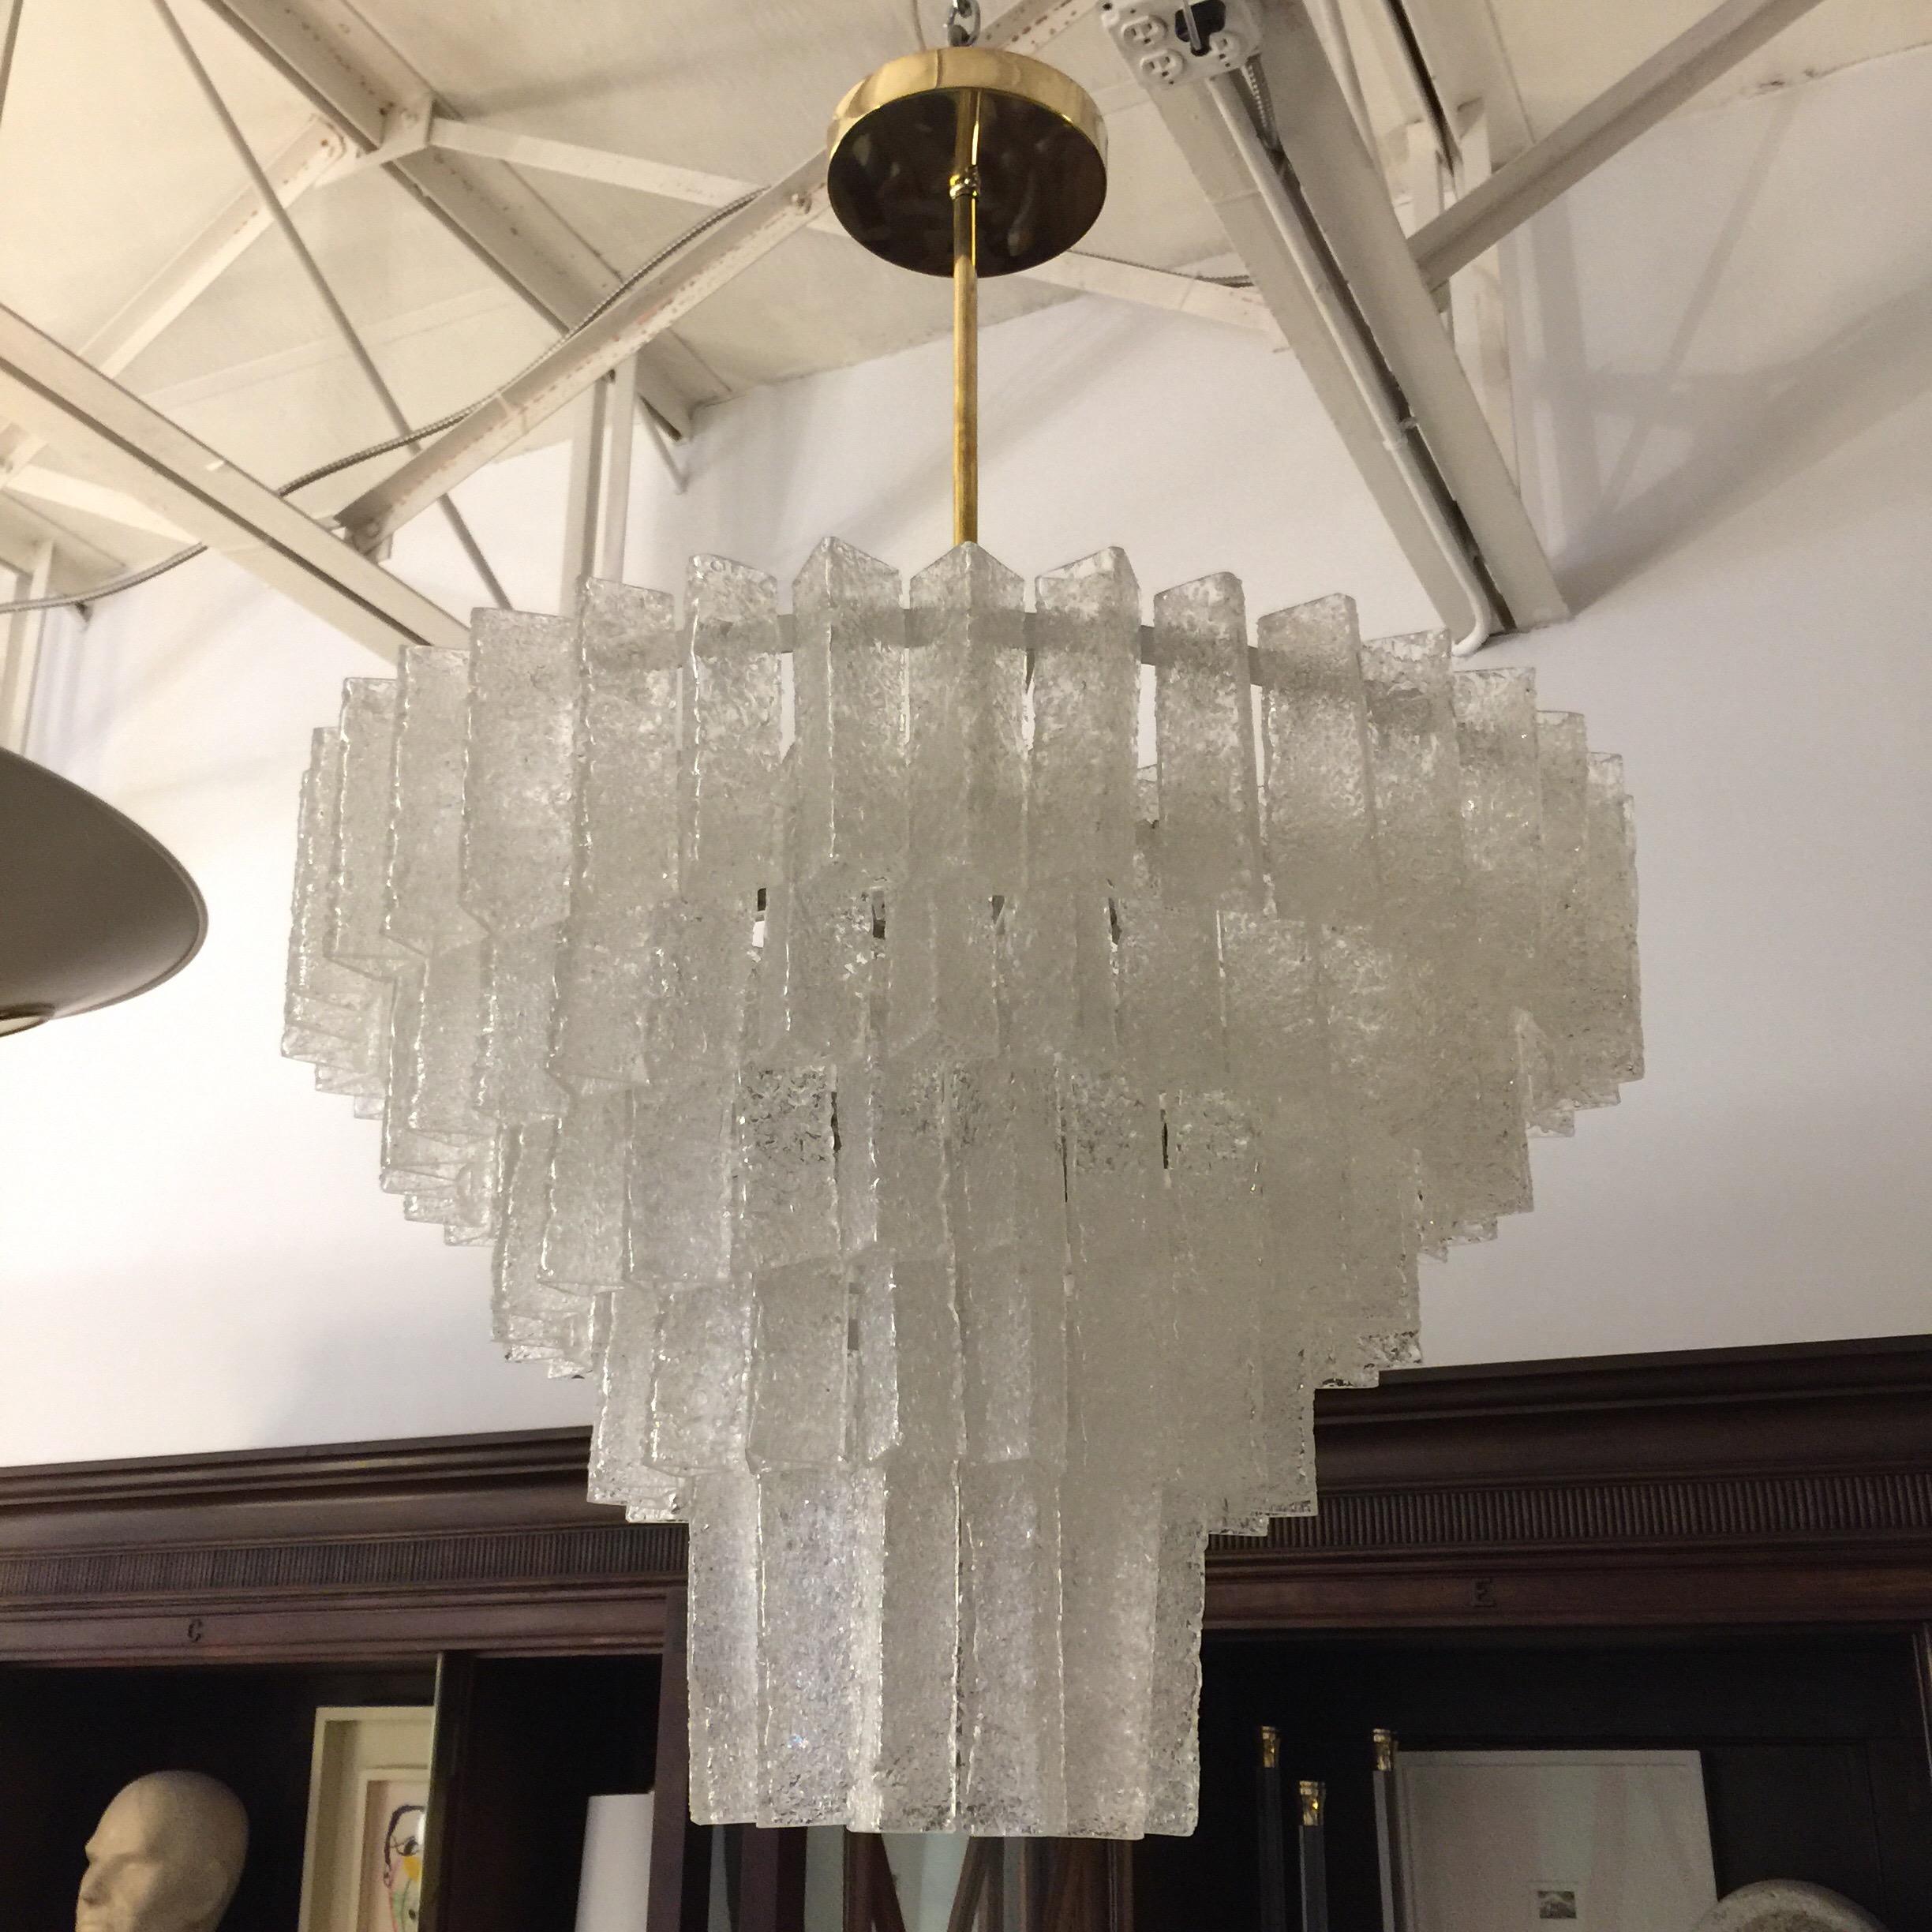 An original vintage 5-tier chandelier from the 1960s with triangular shaped pieces with textured glass that looks like crystalized sugar.
An unusual Italian masterpiece by Seguso - shaped in descending spheres, providing beautiful lighting. (12